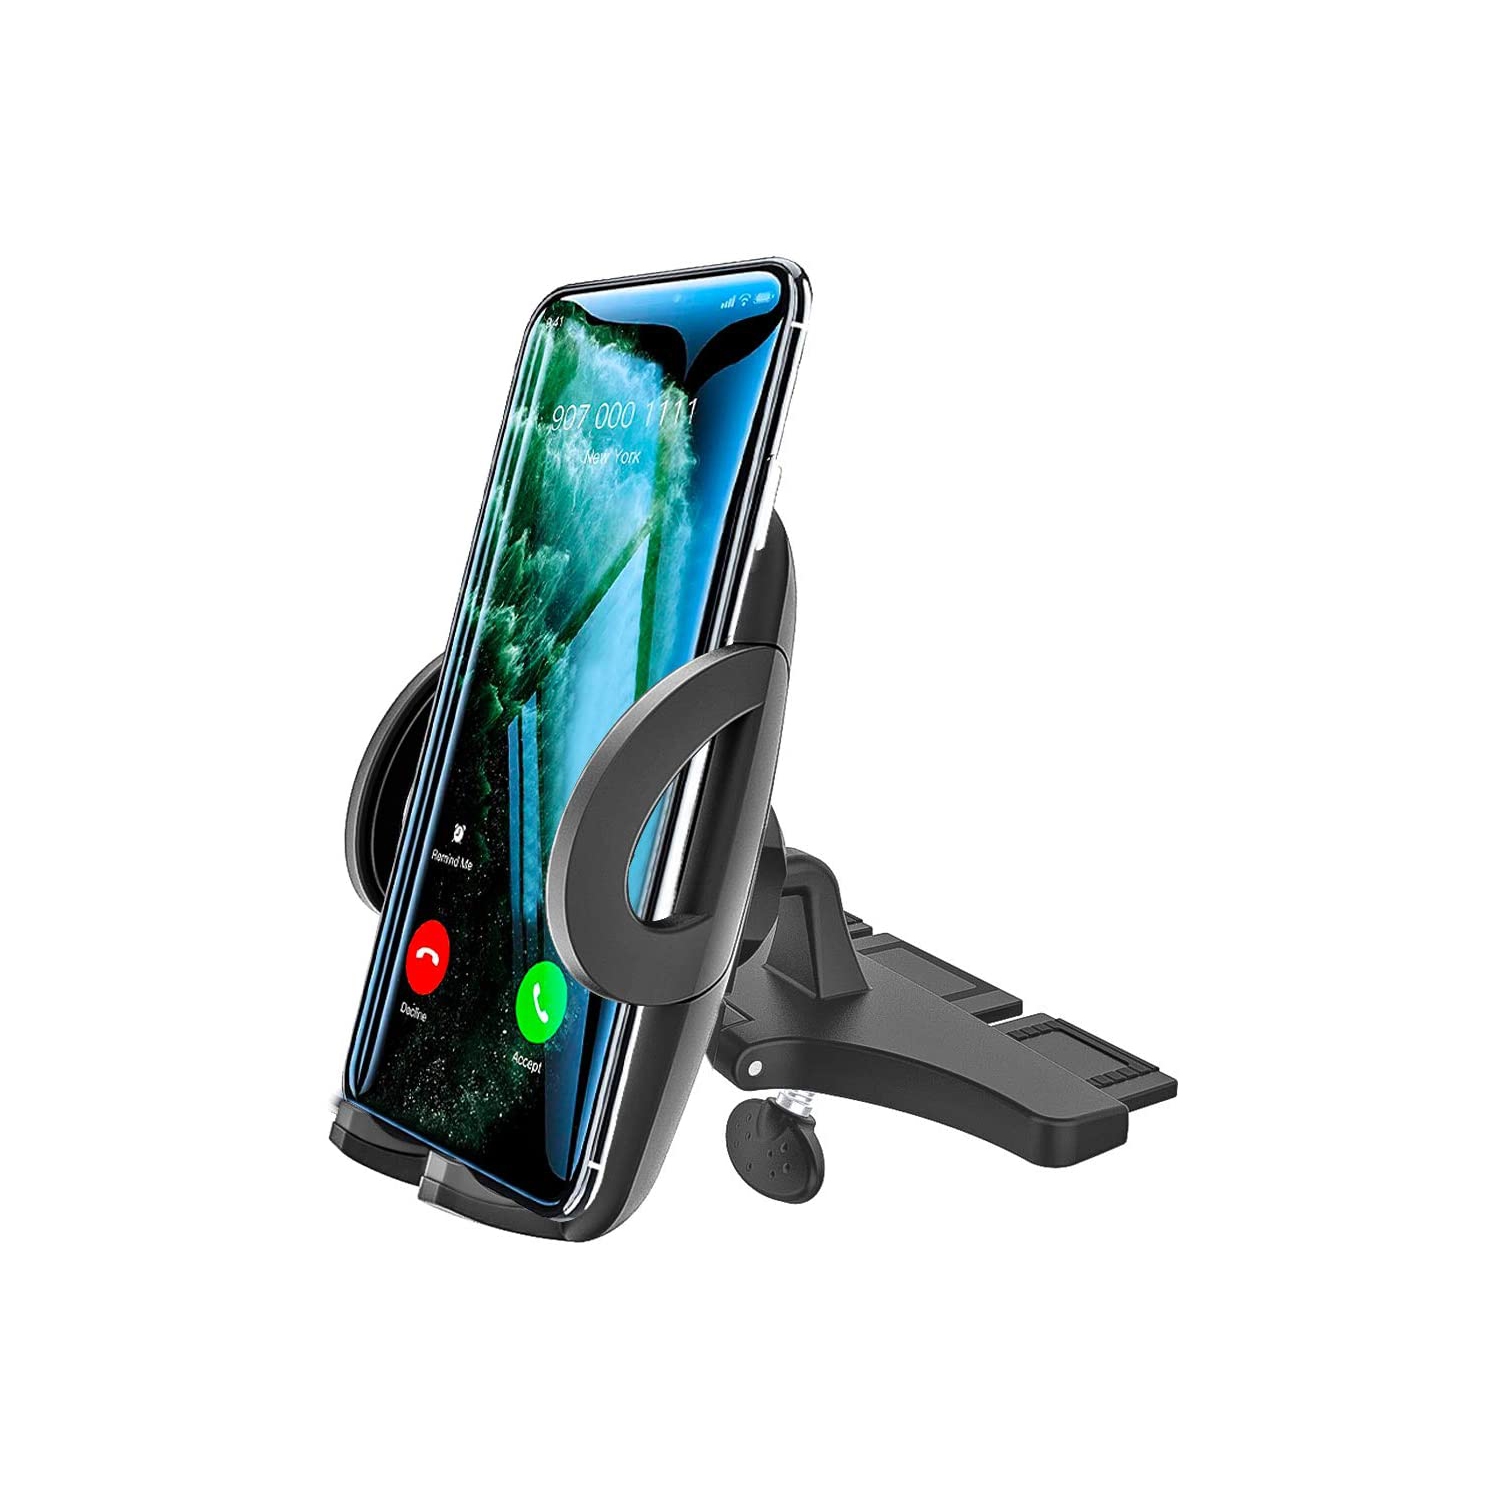 woleyi Phone Holder for Car CD Slot, Universal CD Slot Phone Mount for iPhone 11 Pro Max/11/XS Max/XS/XR/X/8 Plus/8/7 Plus/7/6S/SE, Samsung, Huawei, Nokia, LG, HTC and Other 3.5-6.8" Cell Ph